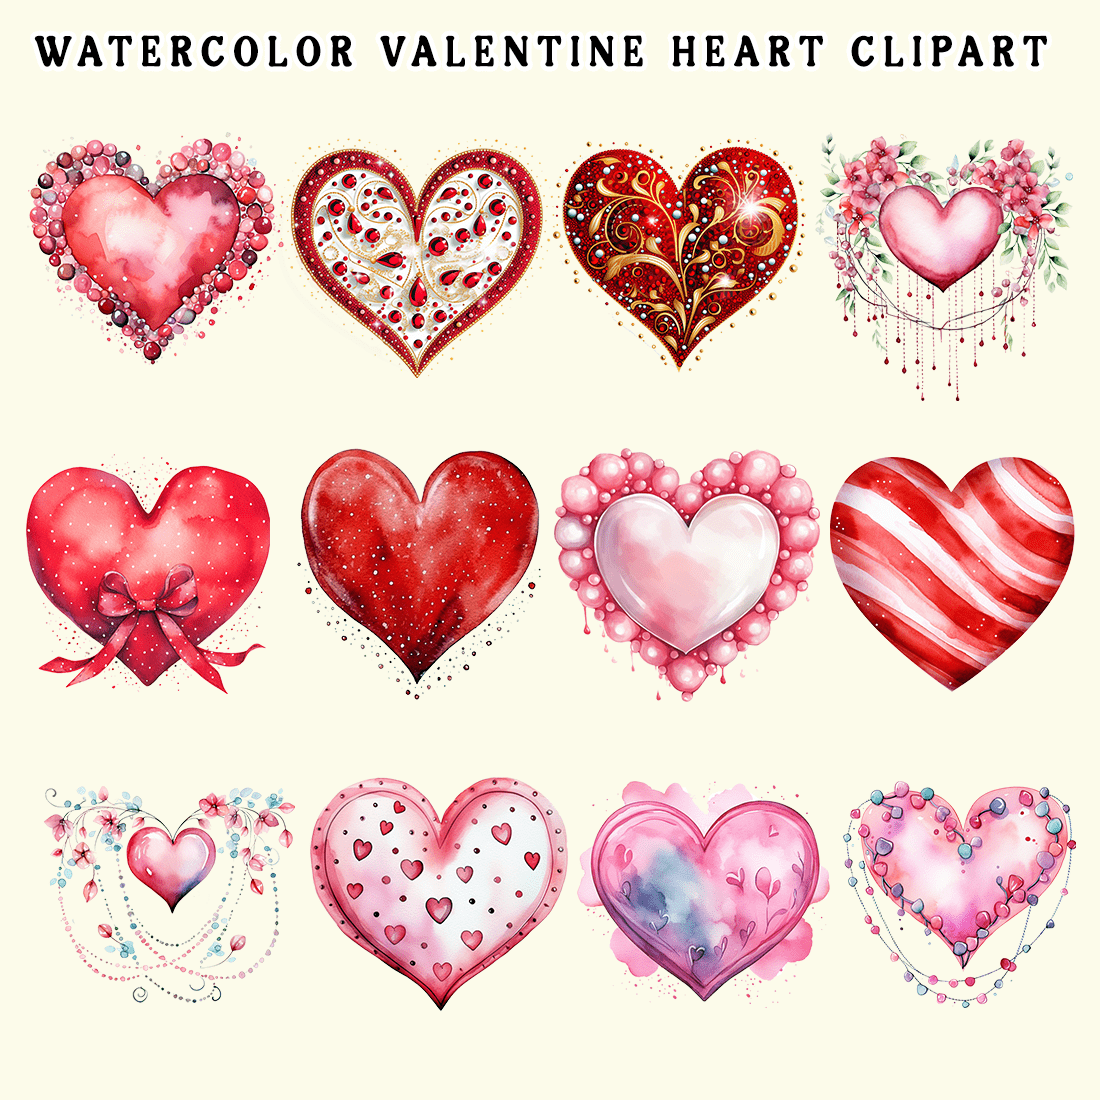 Watercolor Valentine Heart Clipart preview image.